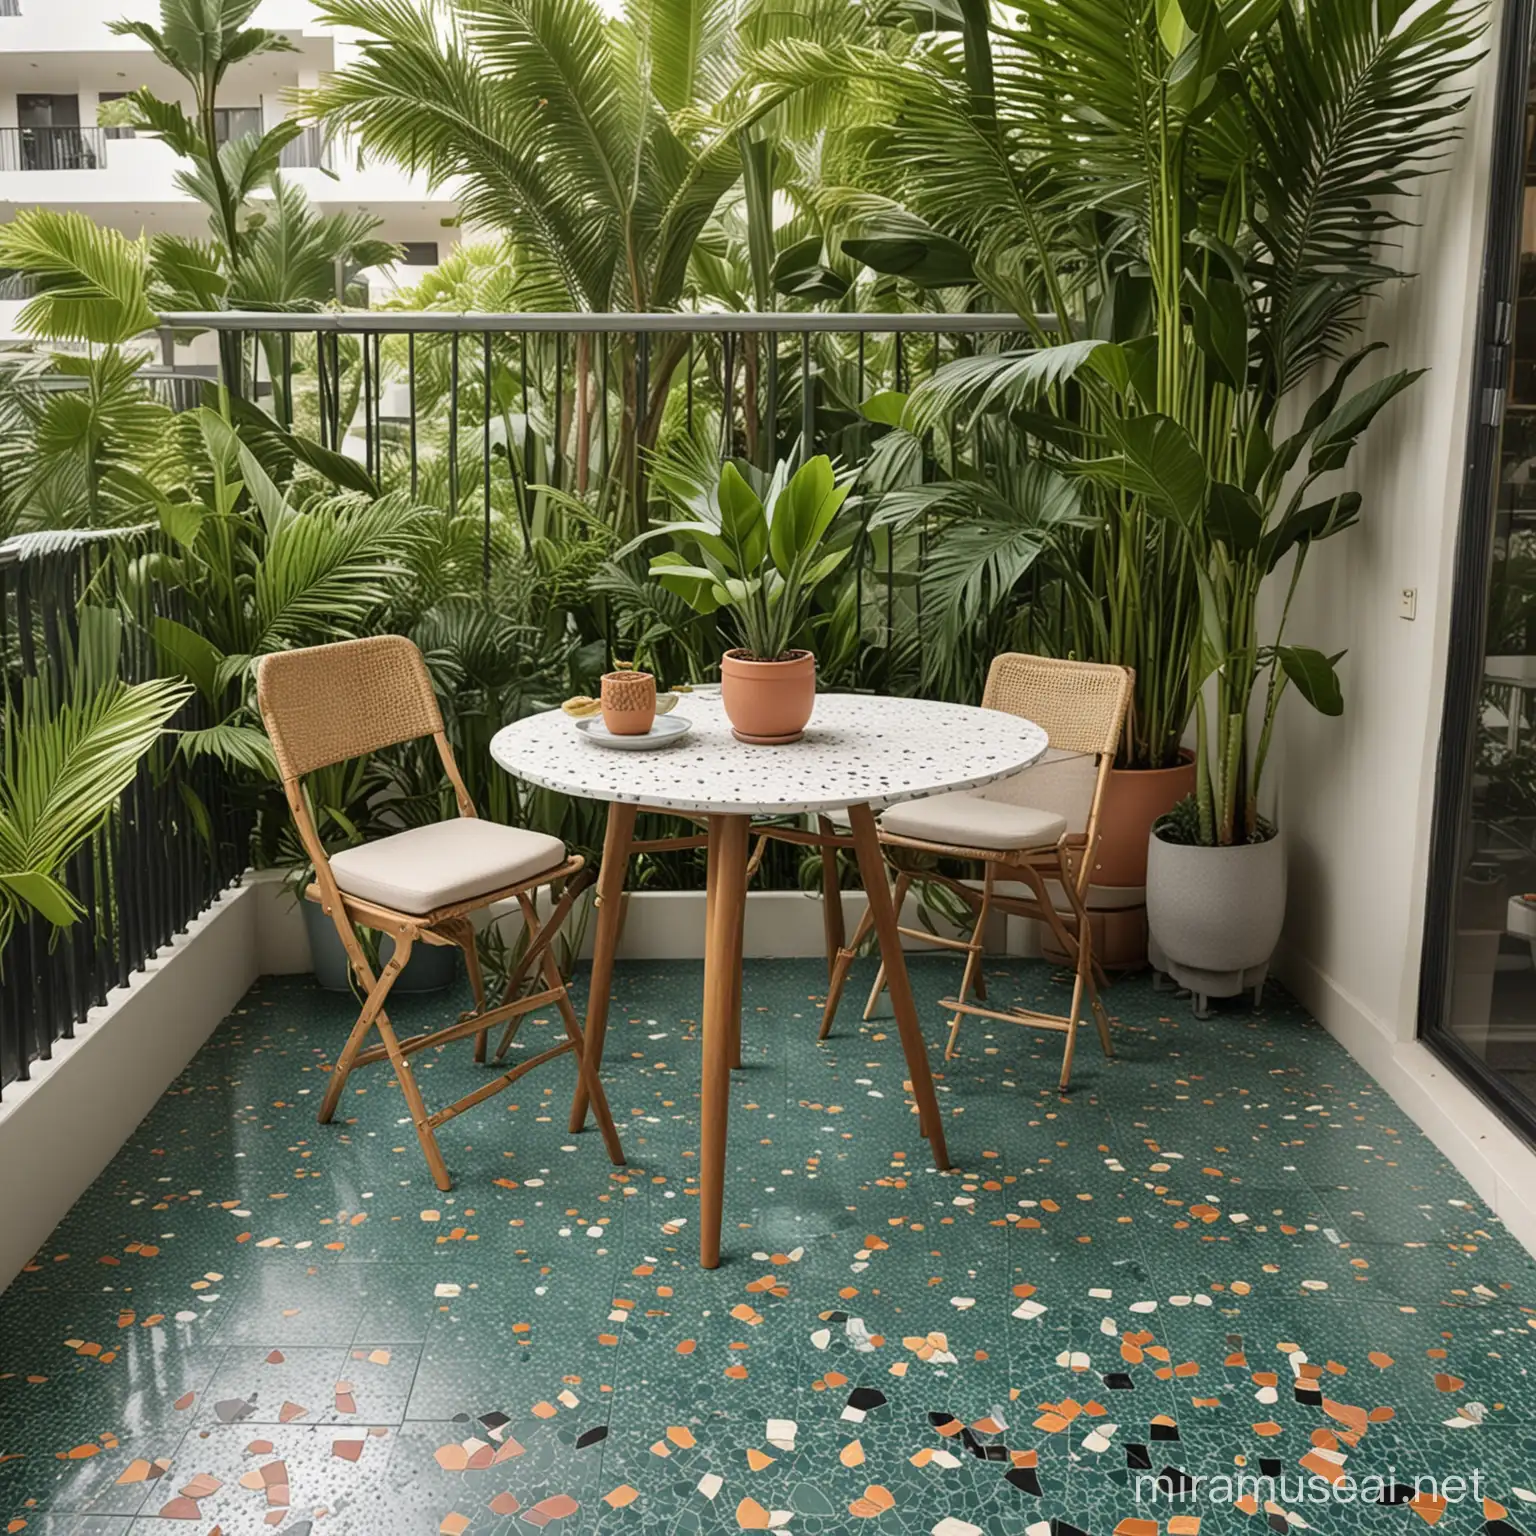 "Imagine a lush tropical oasis on your balcony, with sleek mid century modern design elements and a stunning terrazzo floor